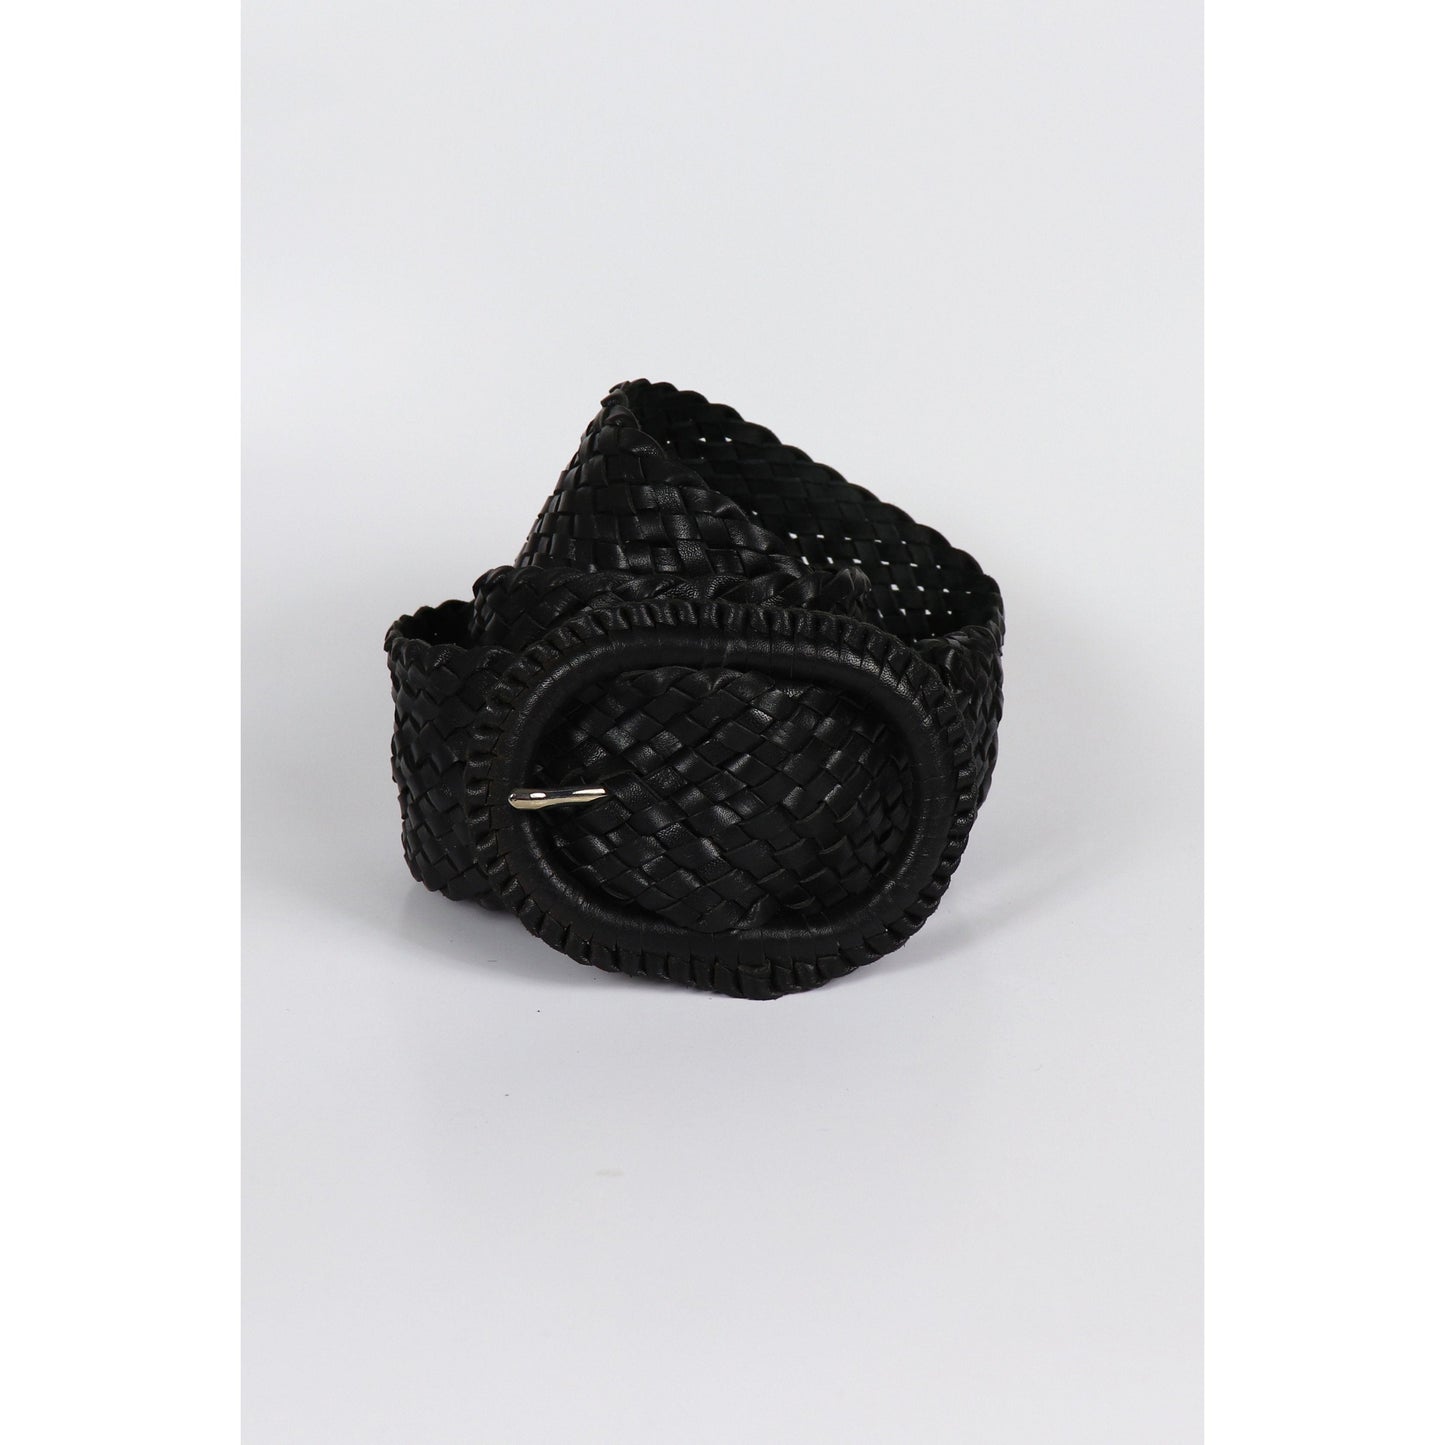 Black woven leather belt coiled.